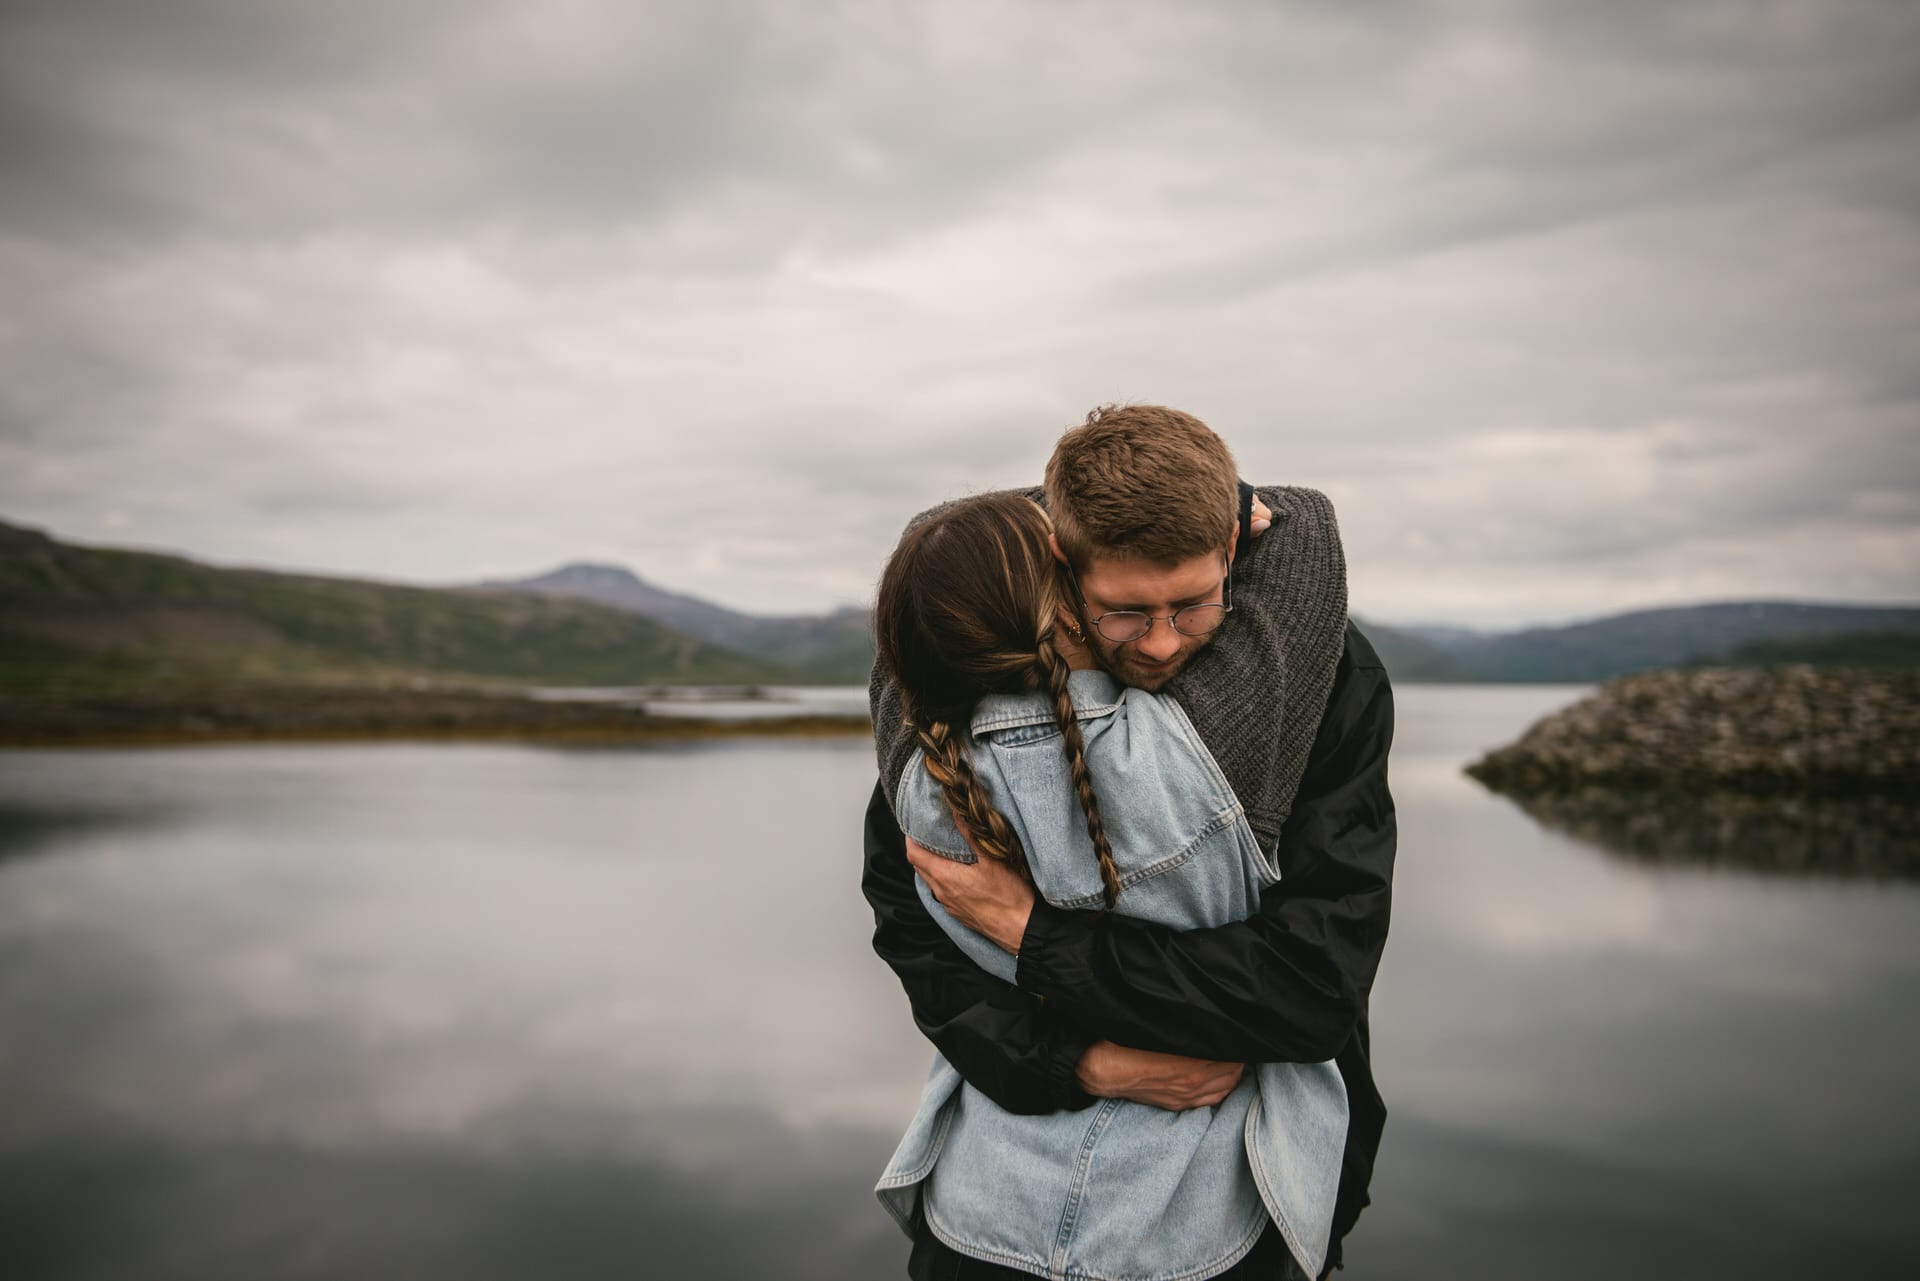 Intimate moment as the couple shares a quiet embrace amidst the captivating Westfjords.